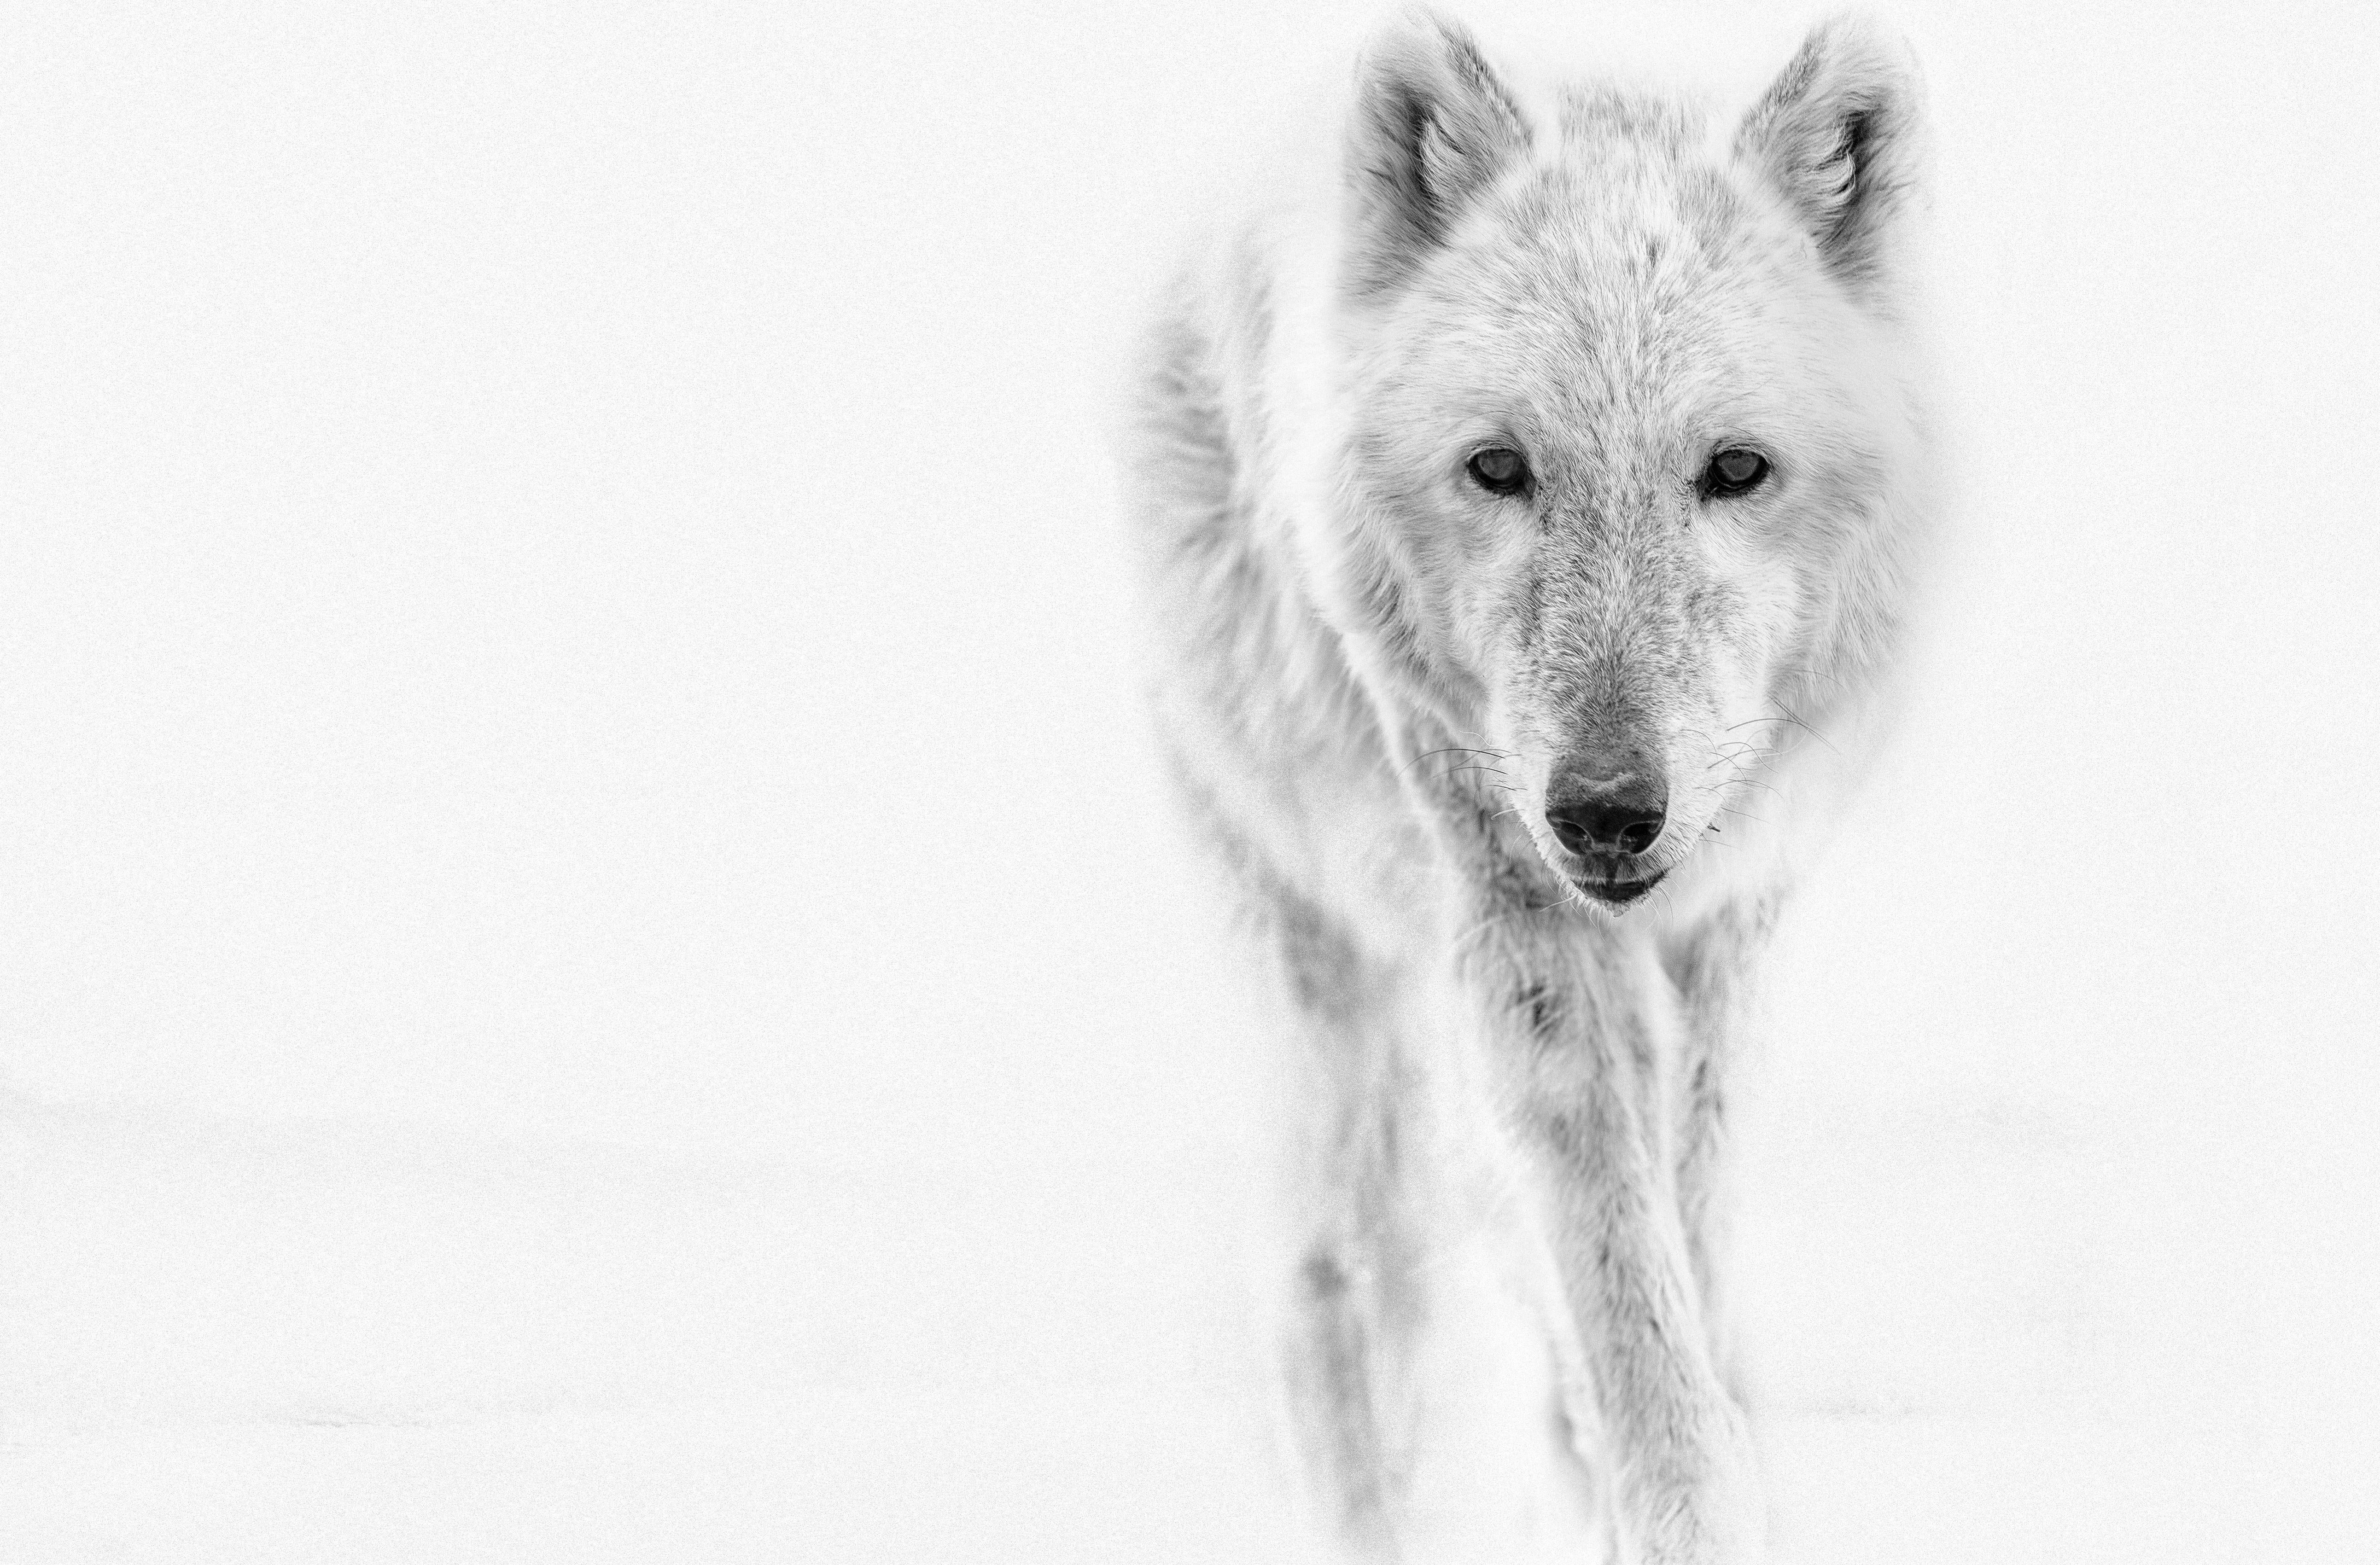 This is a contemporary black and white photograph of an Arctic Wolf by wildlife photographer Shane Russeck
24x36  Edition of 50. 
Signed by and numbered by Shane 
Printed on archival paper using only archival inks. 

Framing available. Inquire for